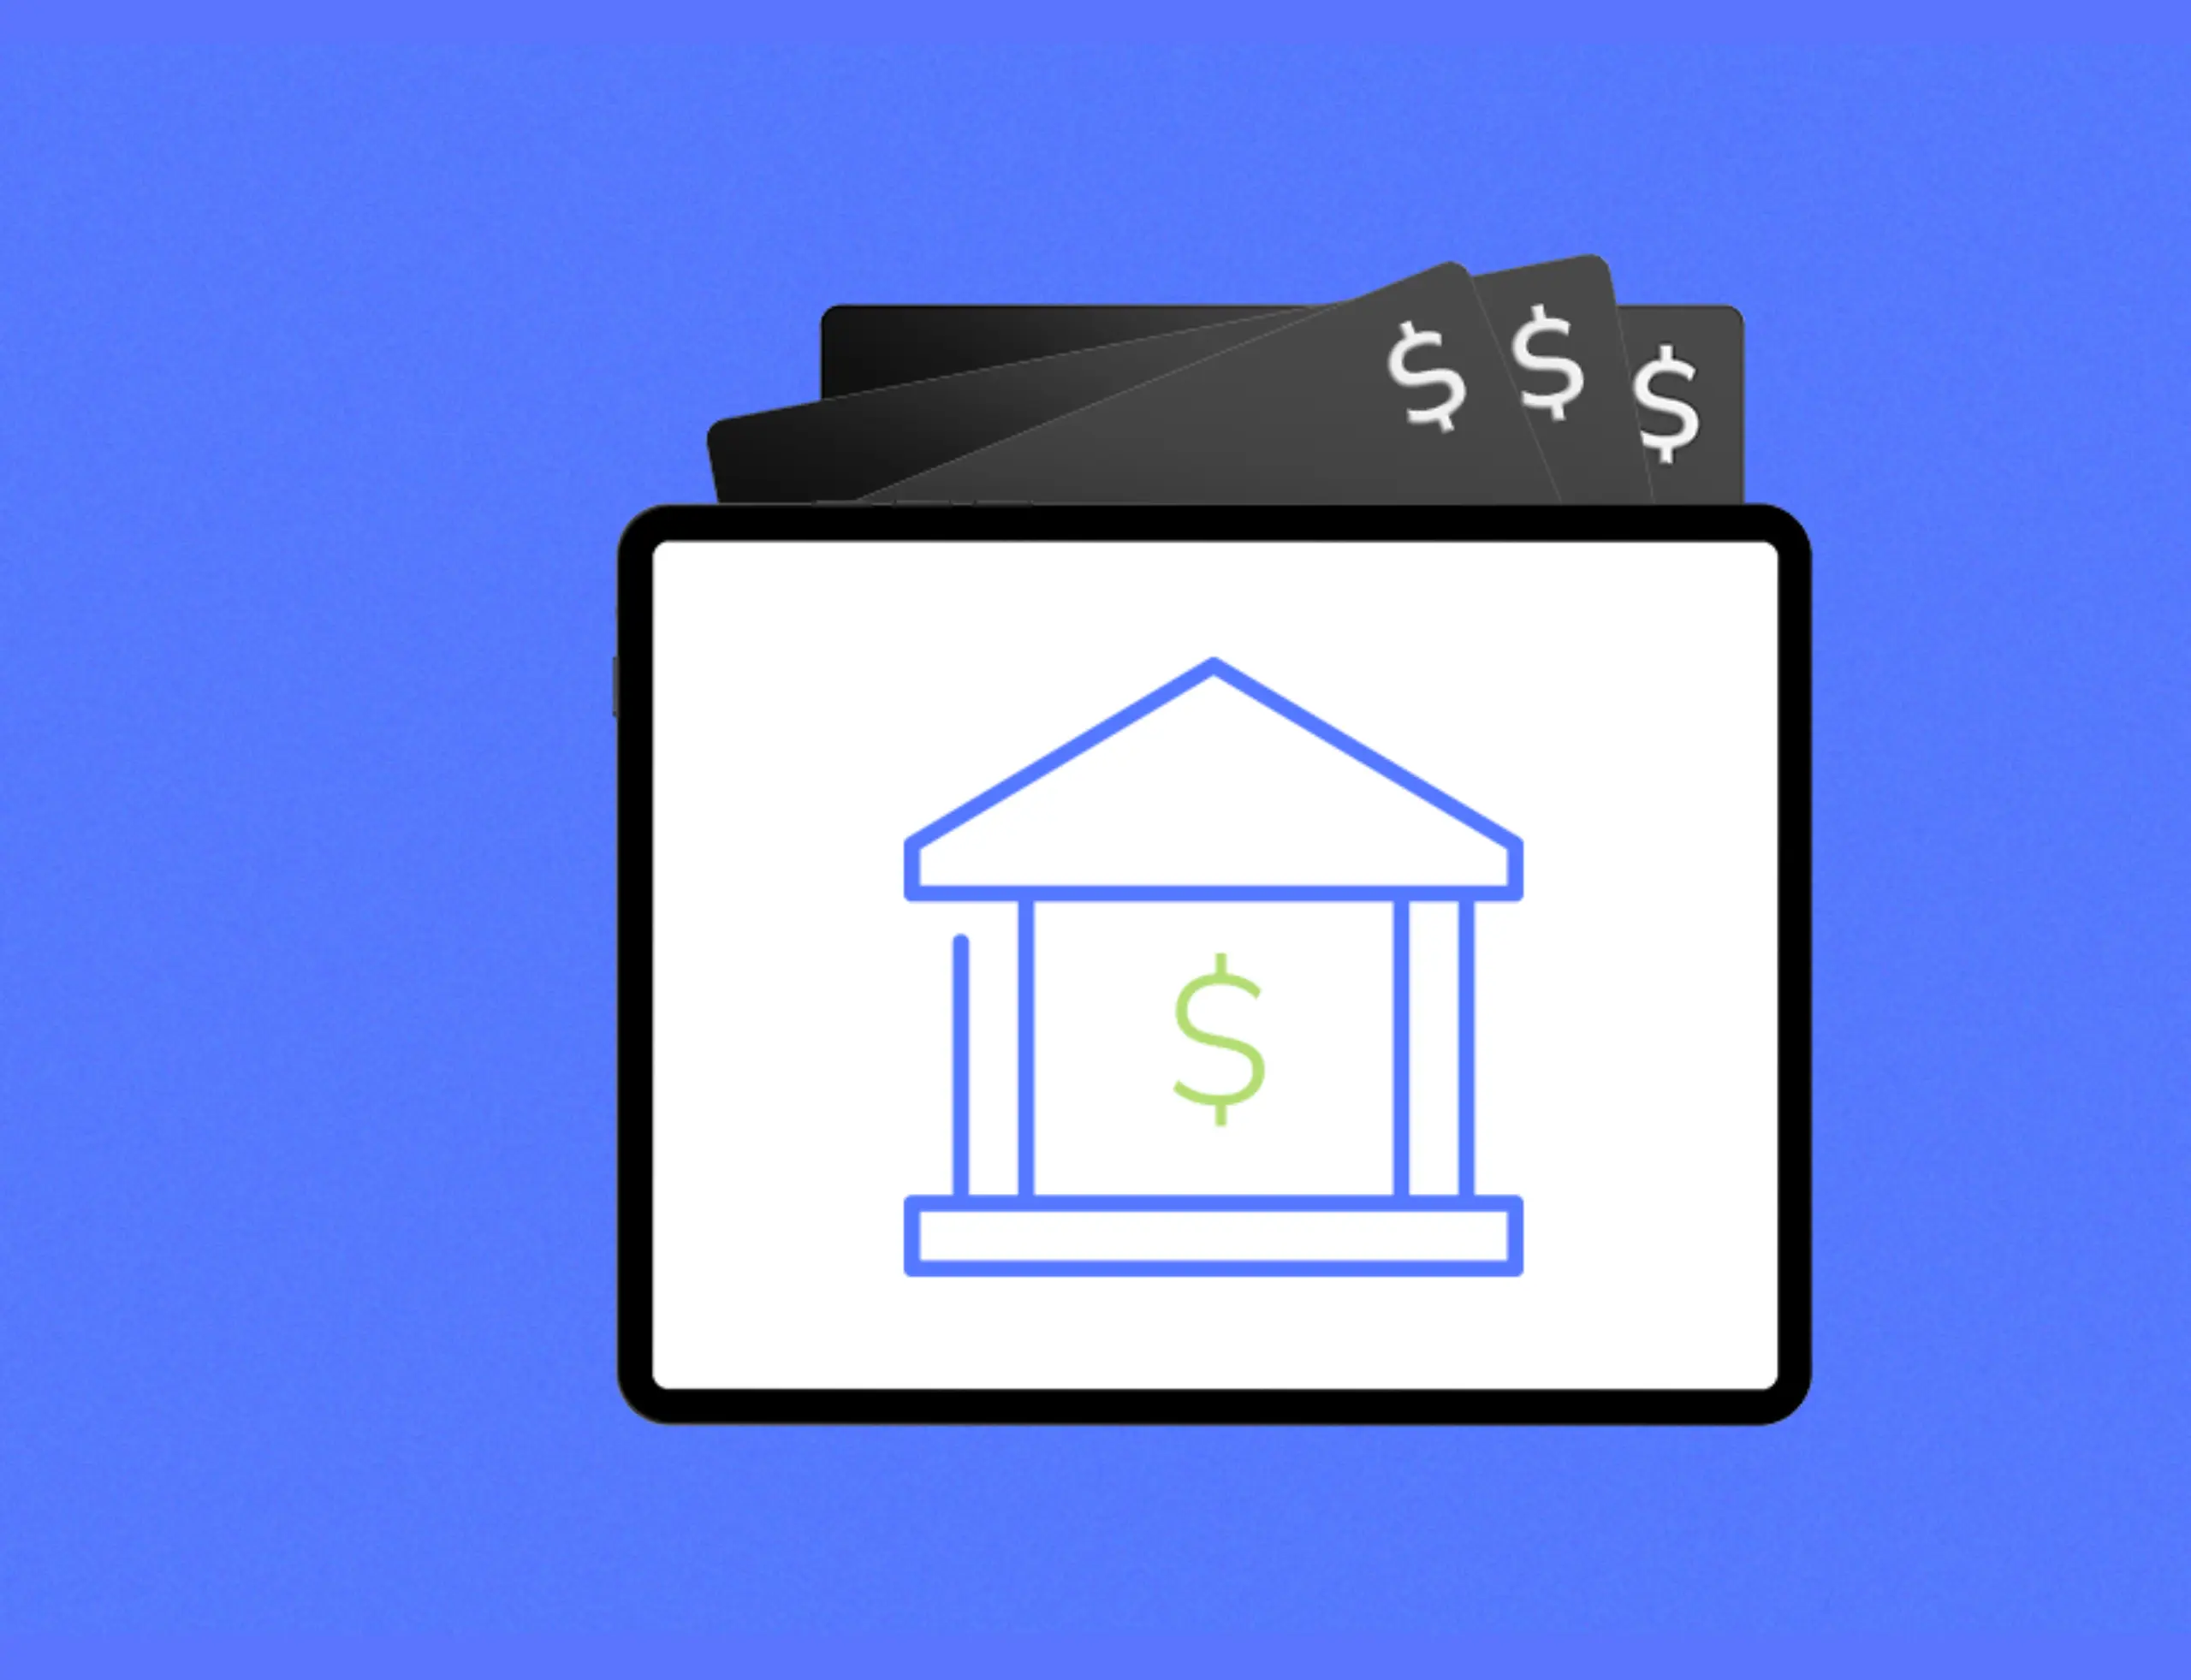 Graphic of a black wallet with protruding dollar bills against a blue background, overlaying an icon of a bank with a dollar sign on it, symbolizing a business bank account.